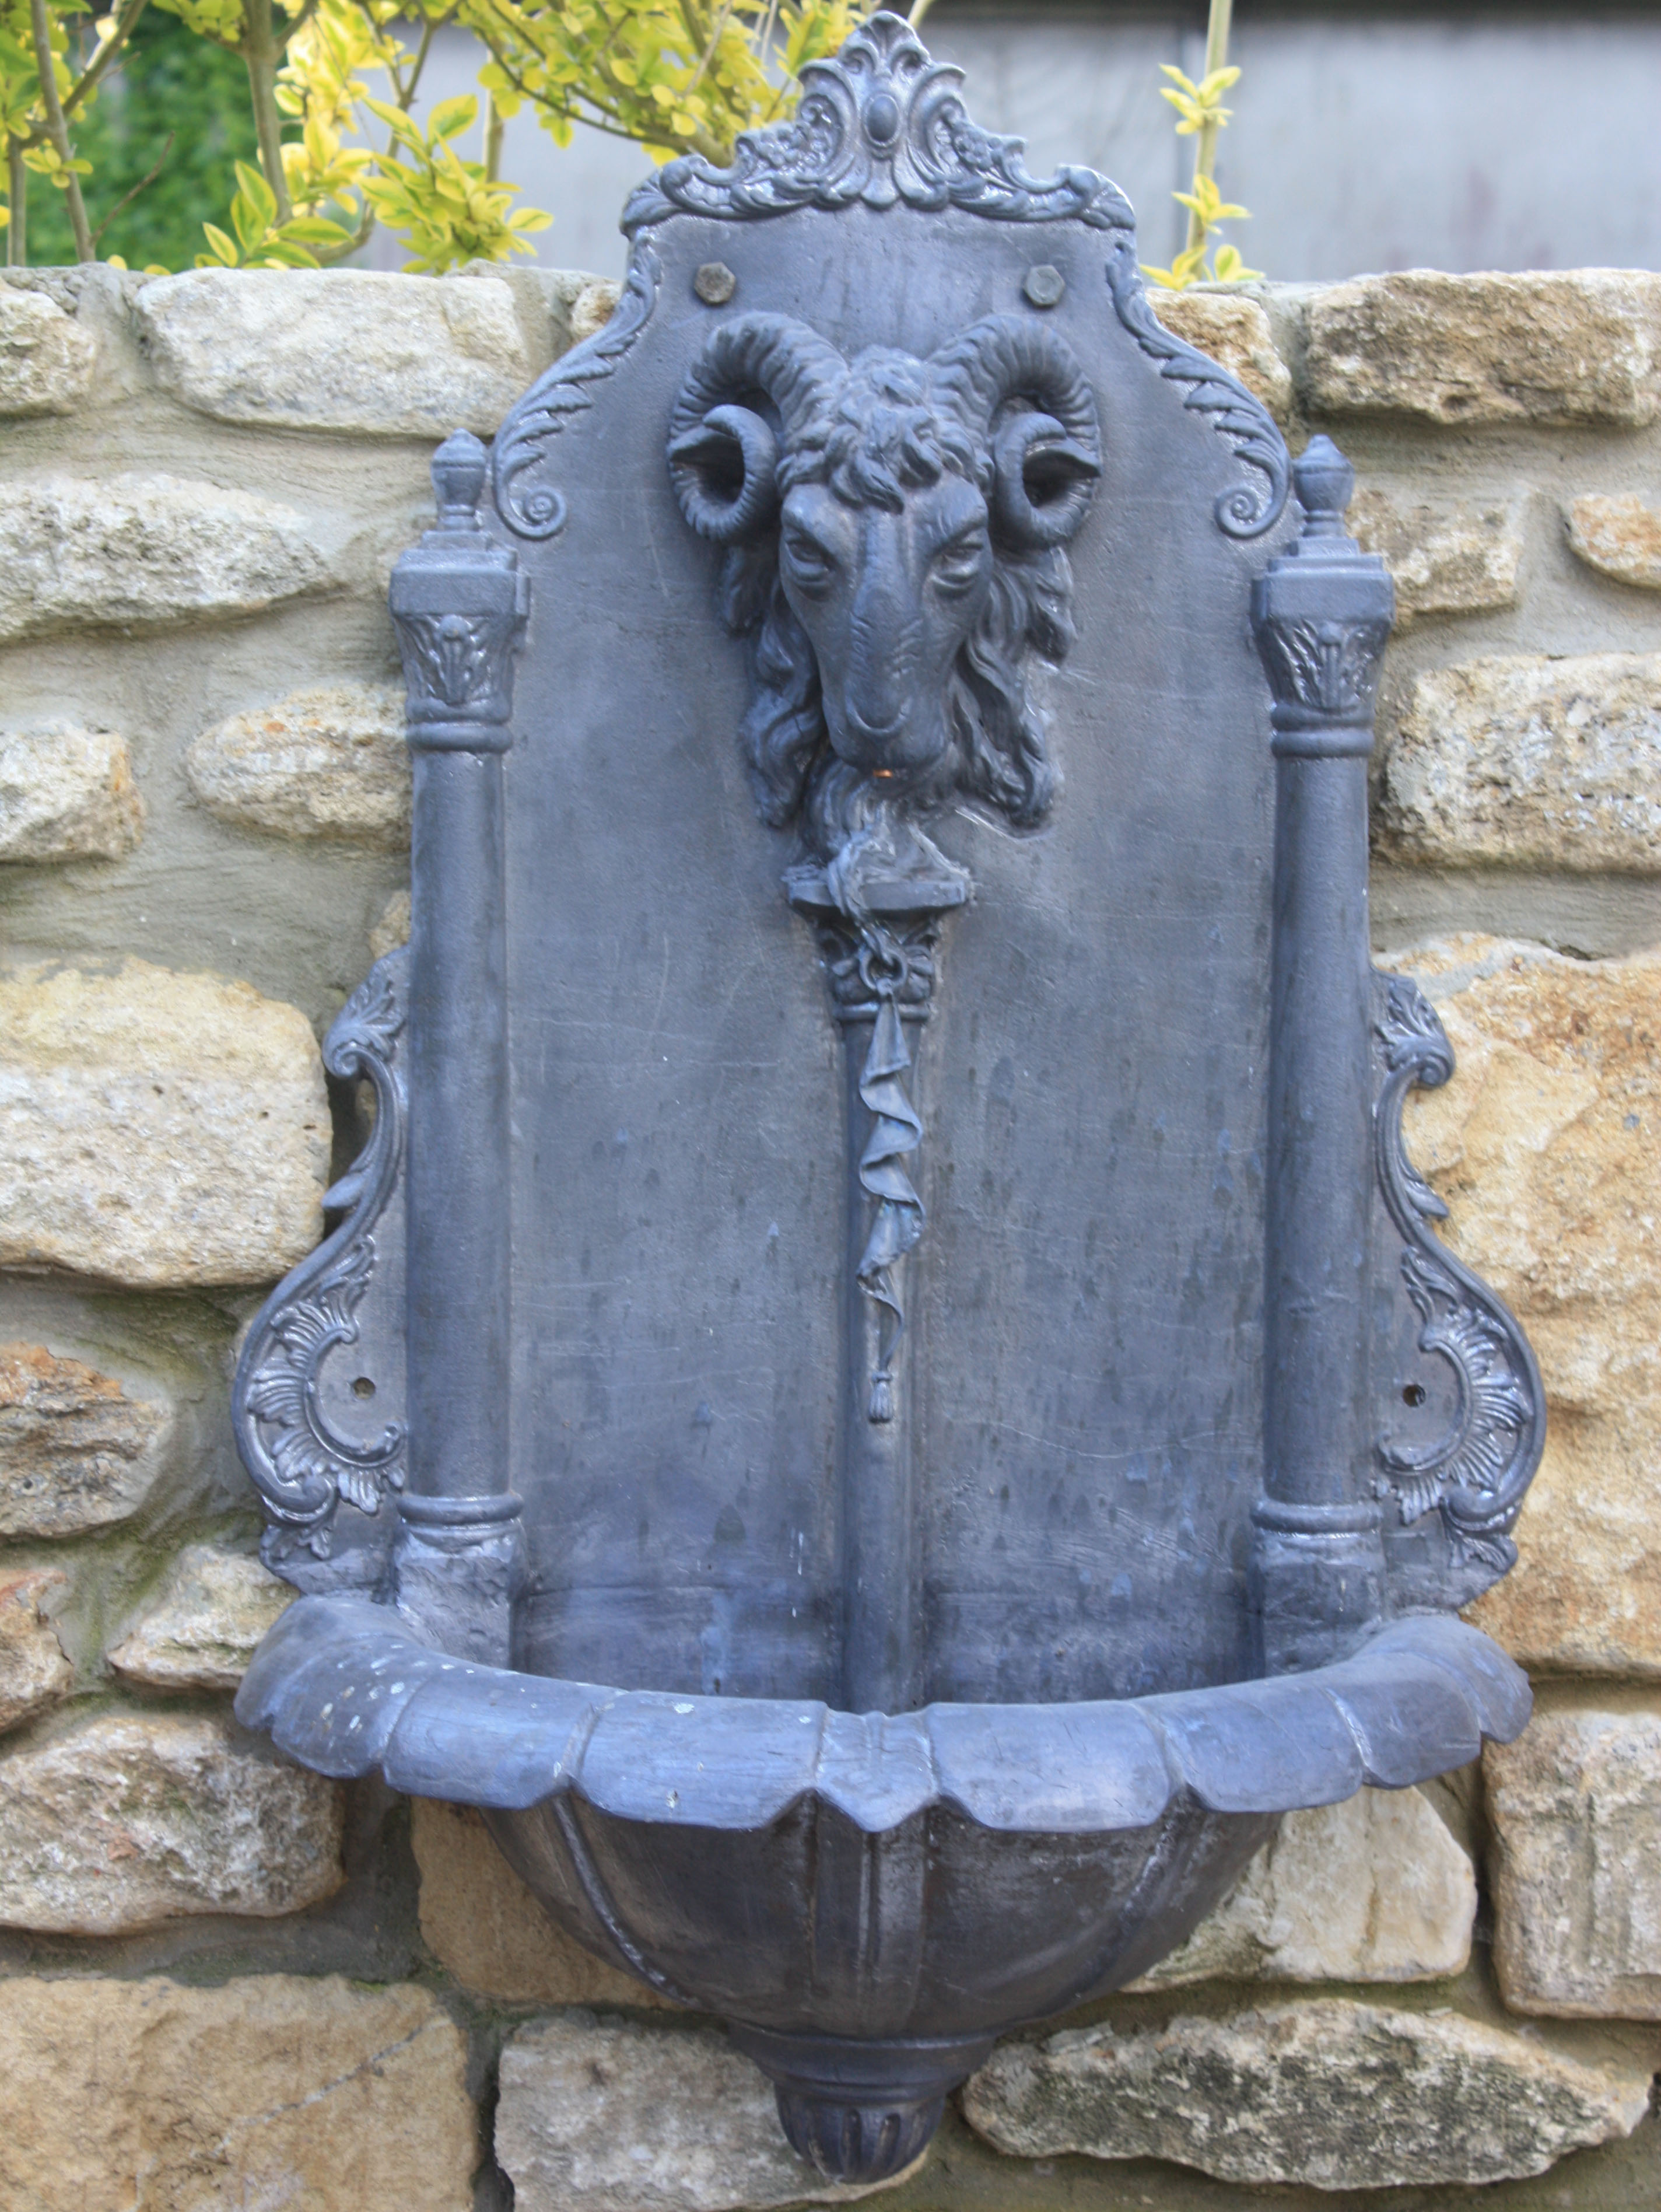 Old School Lead Work - Lead Fountains / Decorative Well Pumps ...